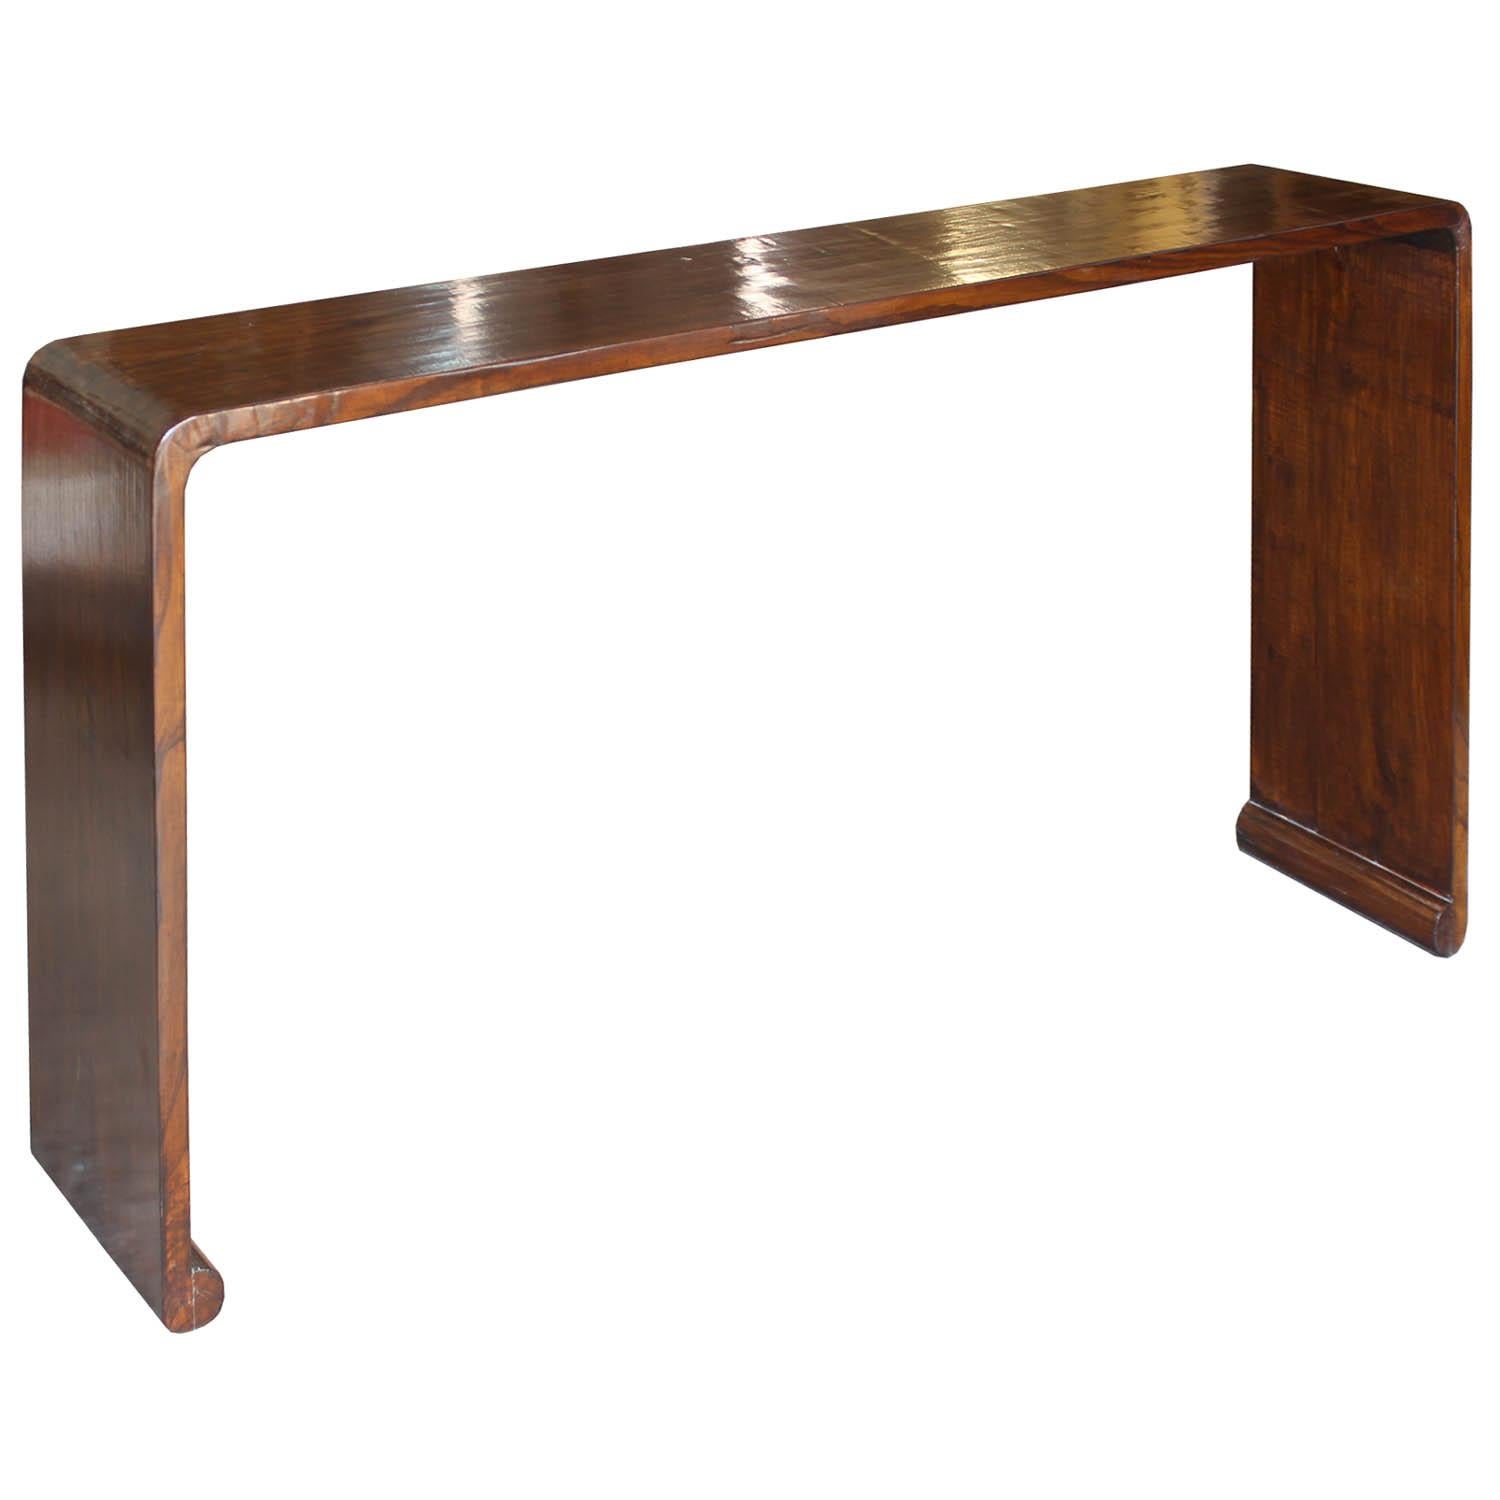 Contemporary elm console table with beautiful wood grain and waterfall sides makes an elegant statement in an entry or living room.